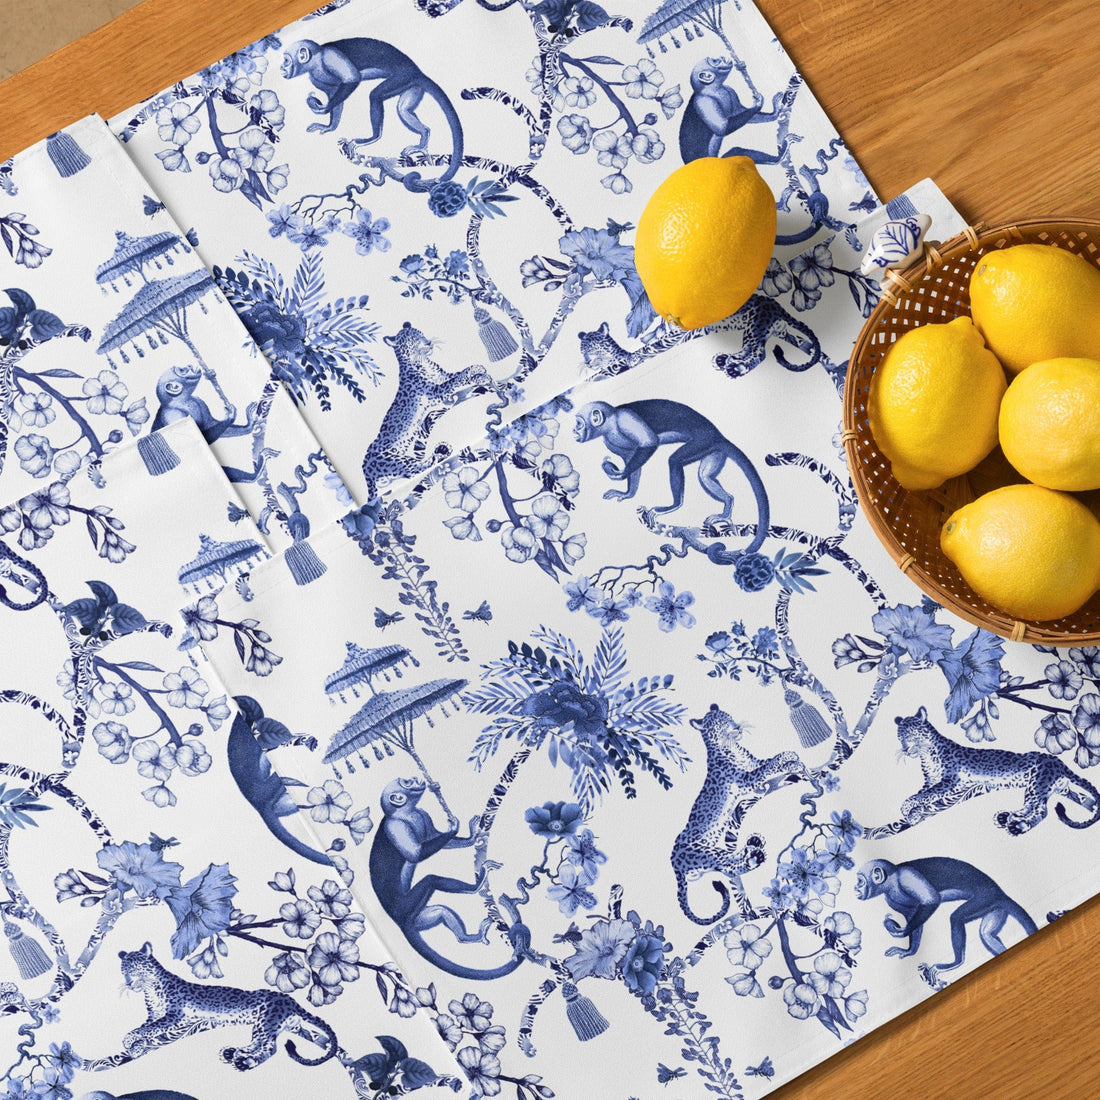 Kate McEnroe New York Chinoiserie Botanical Toile Placemats, Set of 4, Floral Blue and White Chinoiserie Jungle Table Linen, Farmhouse Decor Placemats 6256397_17484